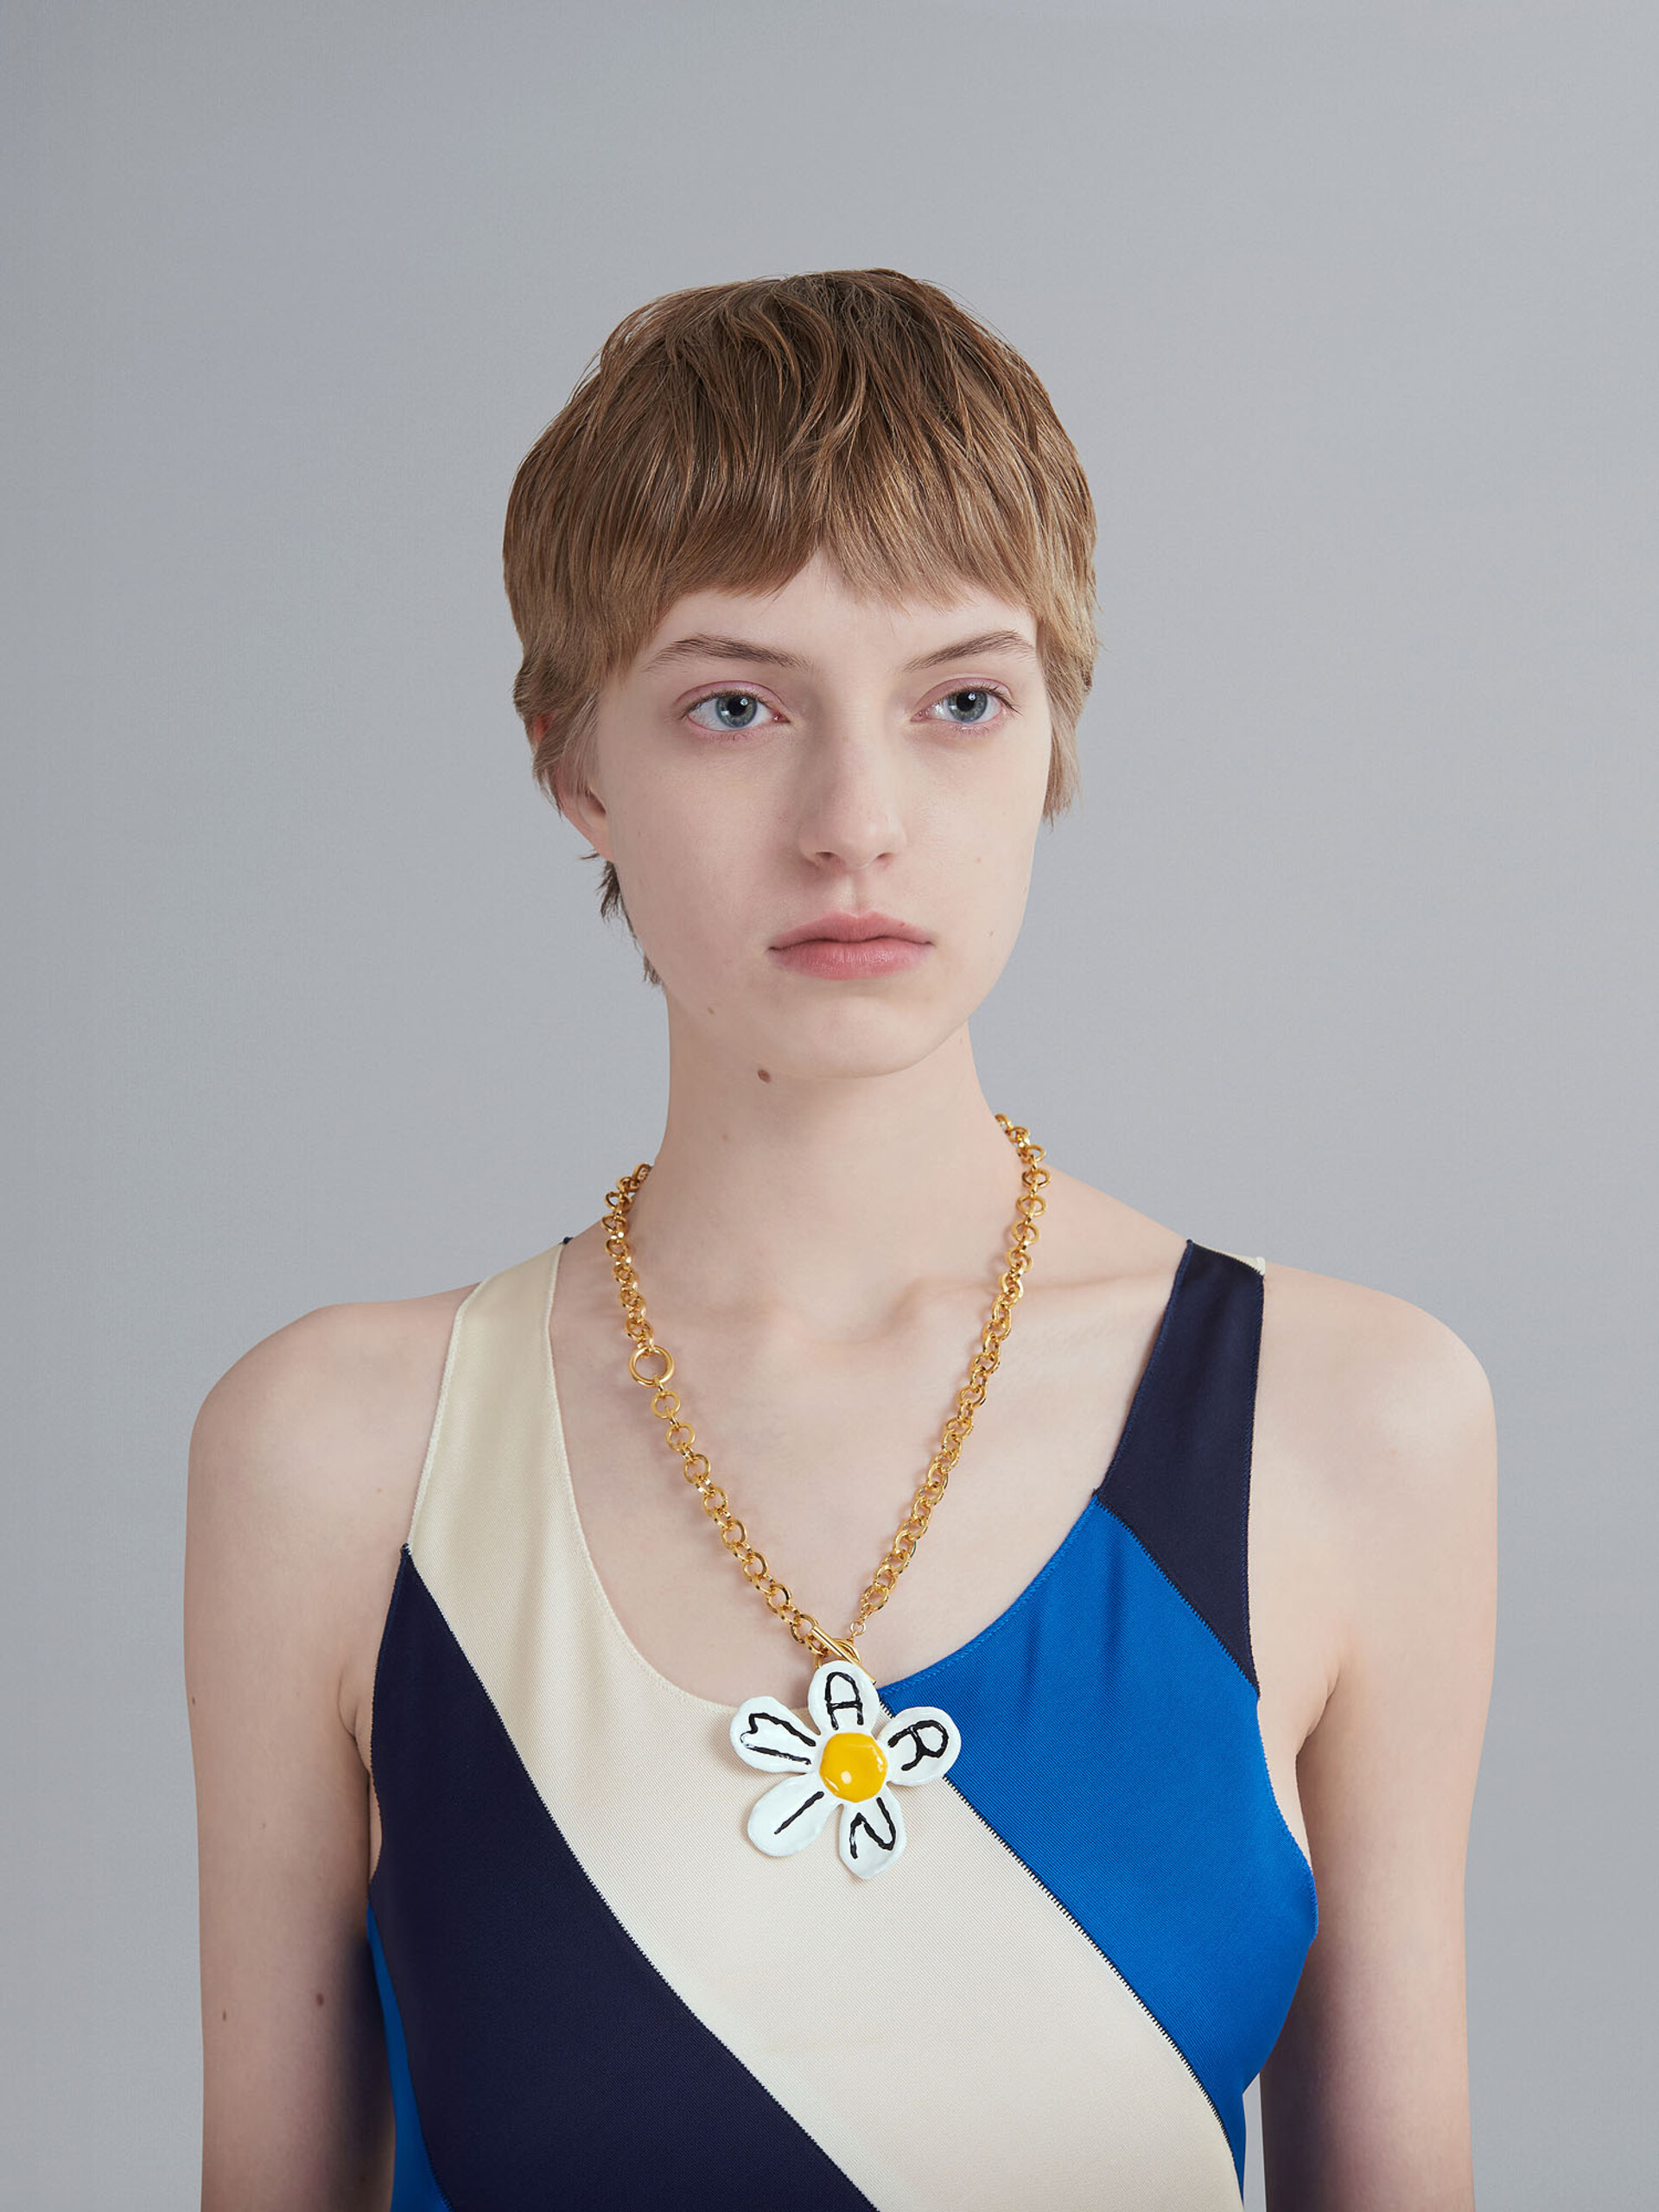 DAISY necklace - Necklaces - Image 2